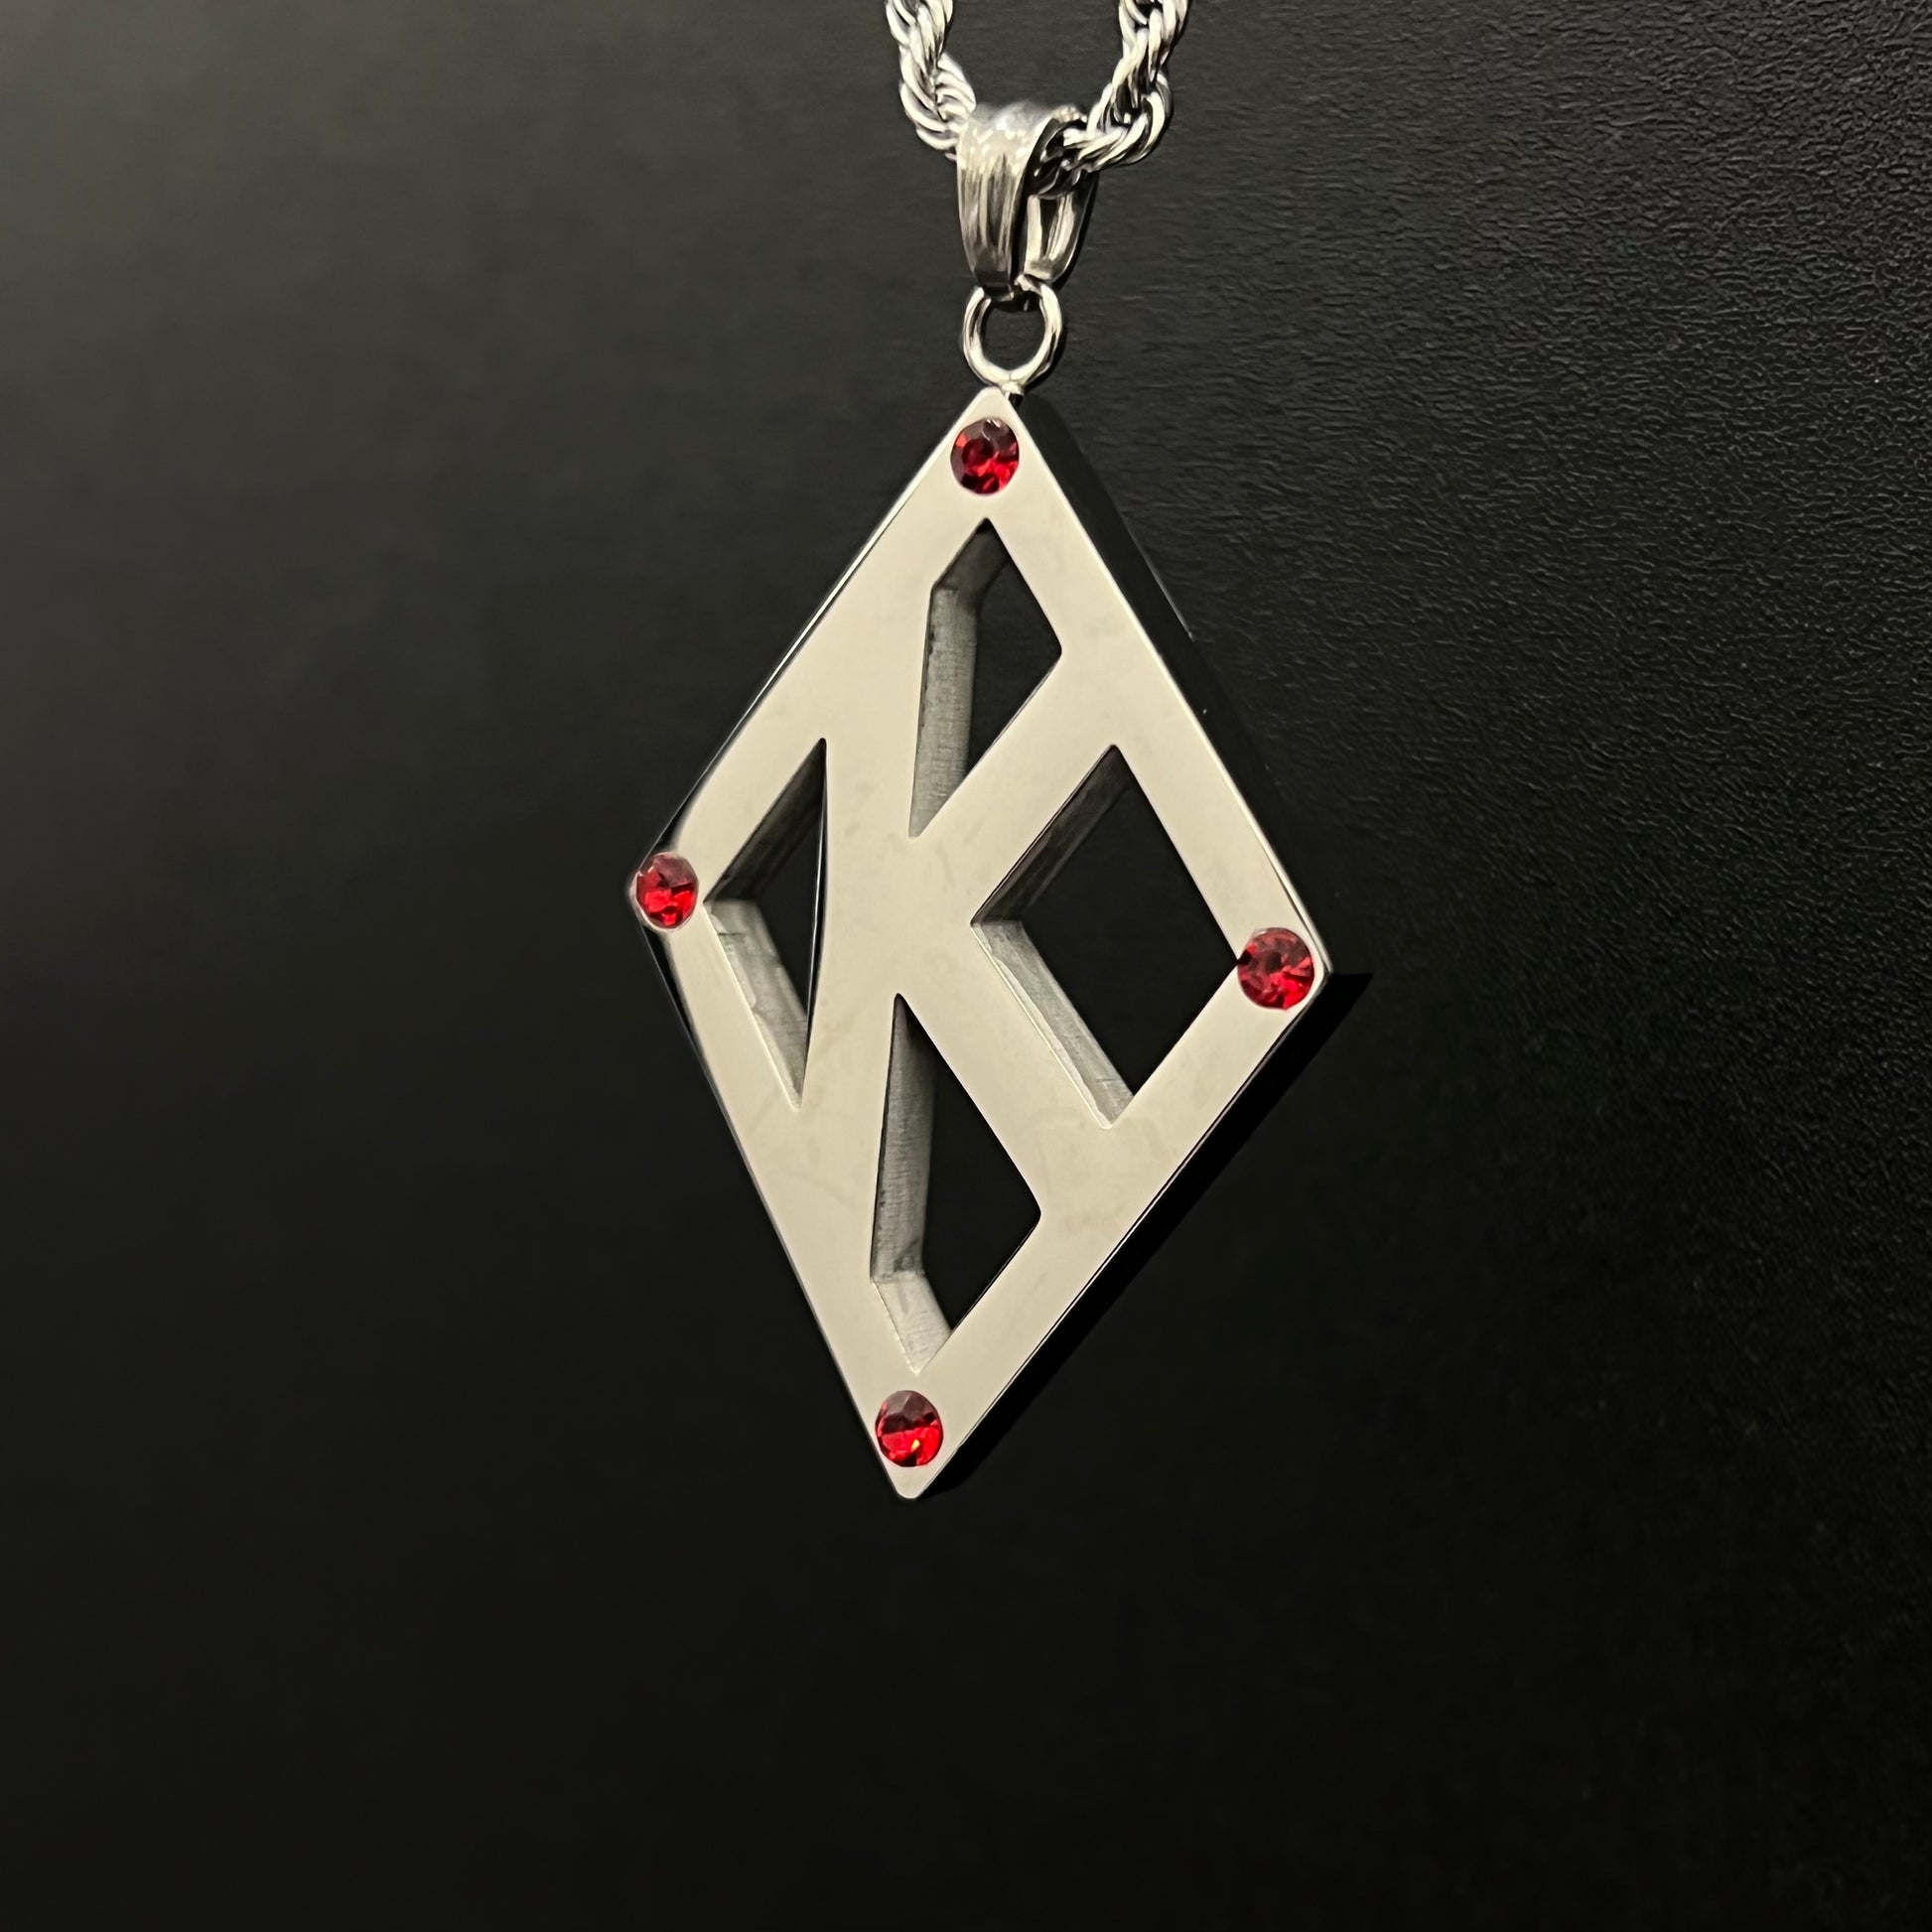 Kappa Alpha Psi necklace/Jewelry and charm  A beyond stunning Kappa Alpha Psi necklace and charm made with Silver Plated. This pendant is made to last for generations and generations, perfect for that special Kappa Alpha Psi member. The ultimate gift to show off your fraternity pride is here!